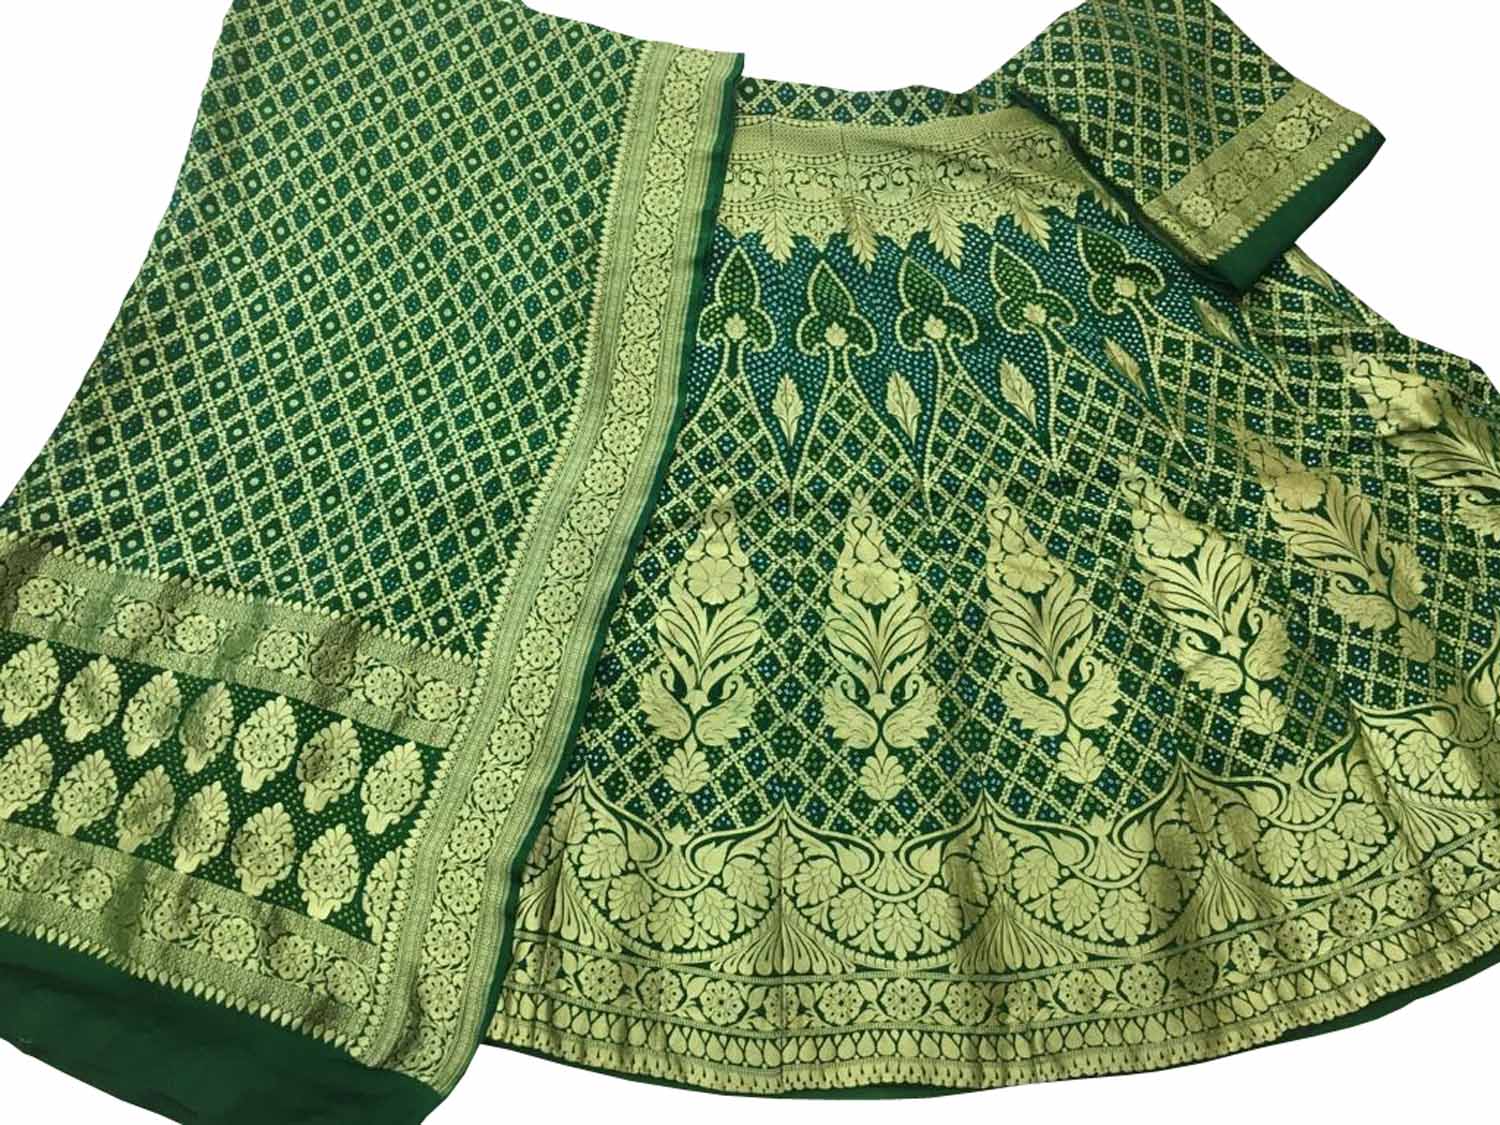 OCTORIA Embroidered Semi Stitched Lehenga Choli - Buy OCTORIA Embroidered Semi  Stitched Lehenga Choli Online at Best Prices in India | Flipkart.com